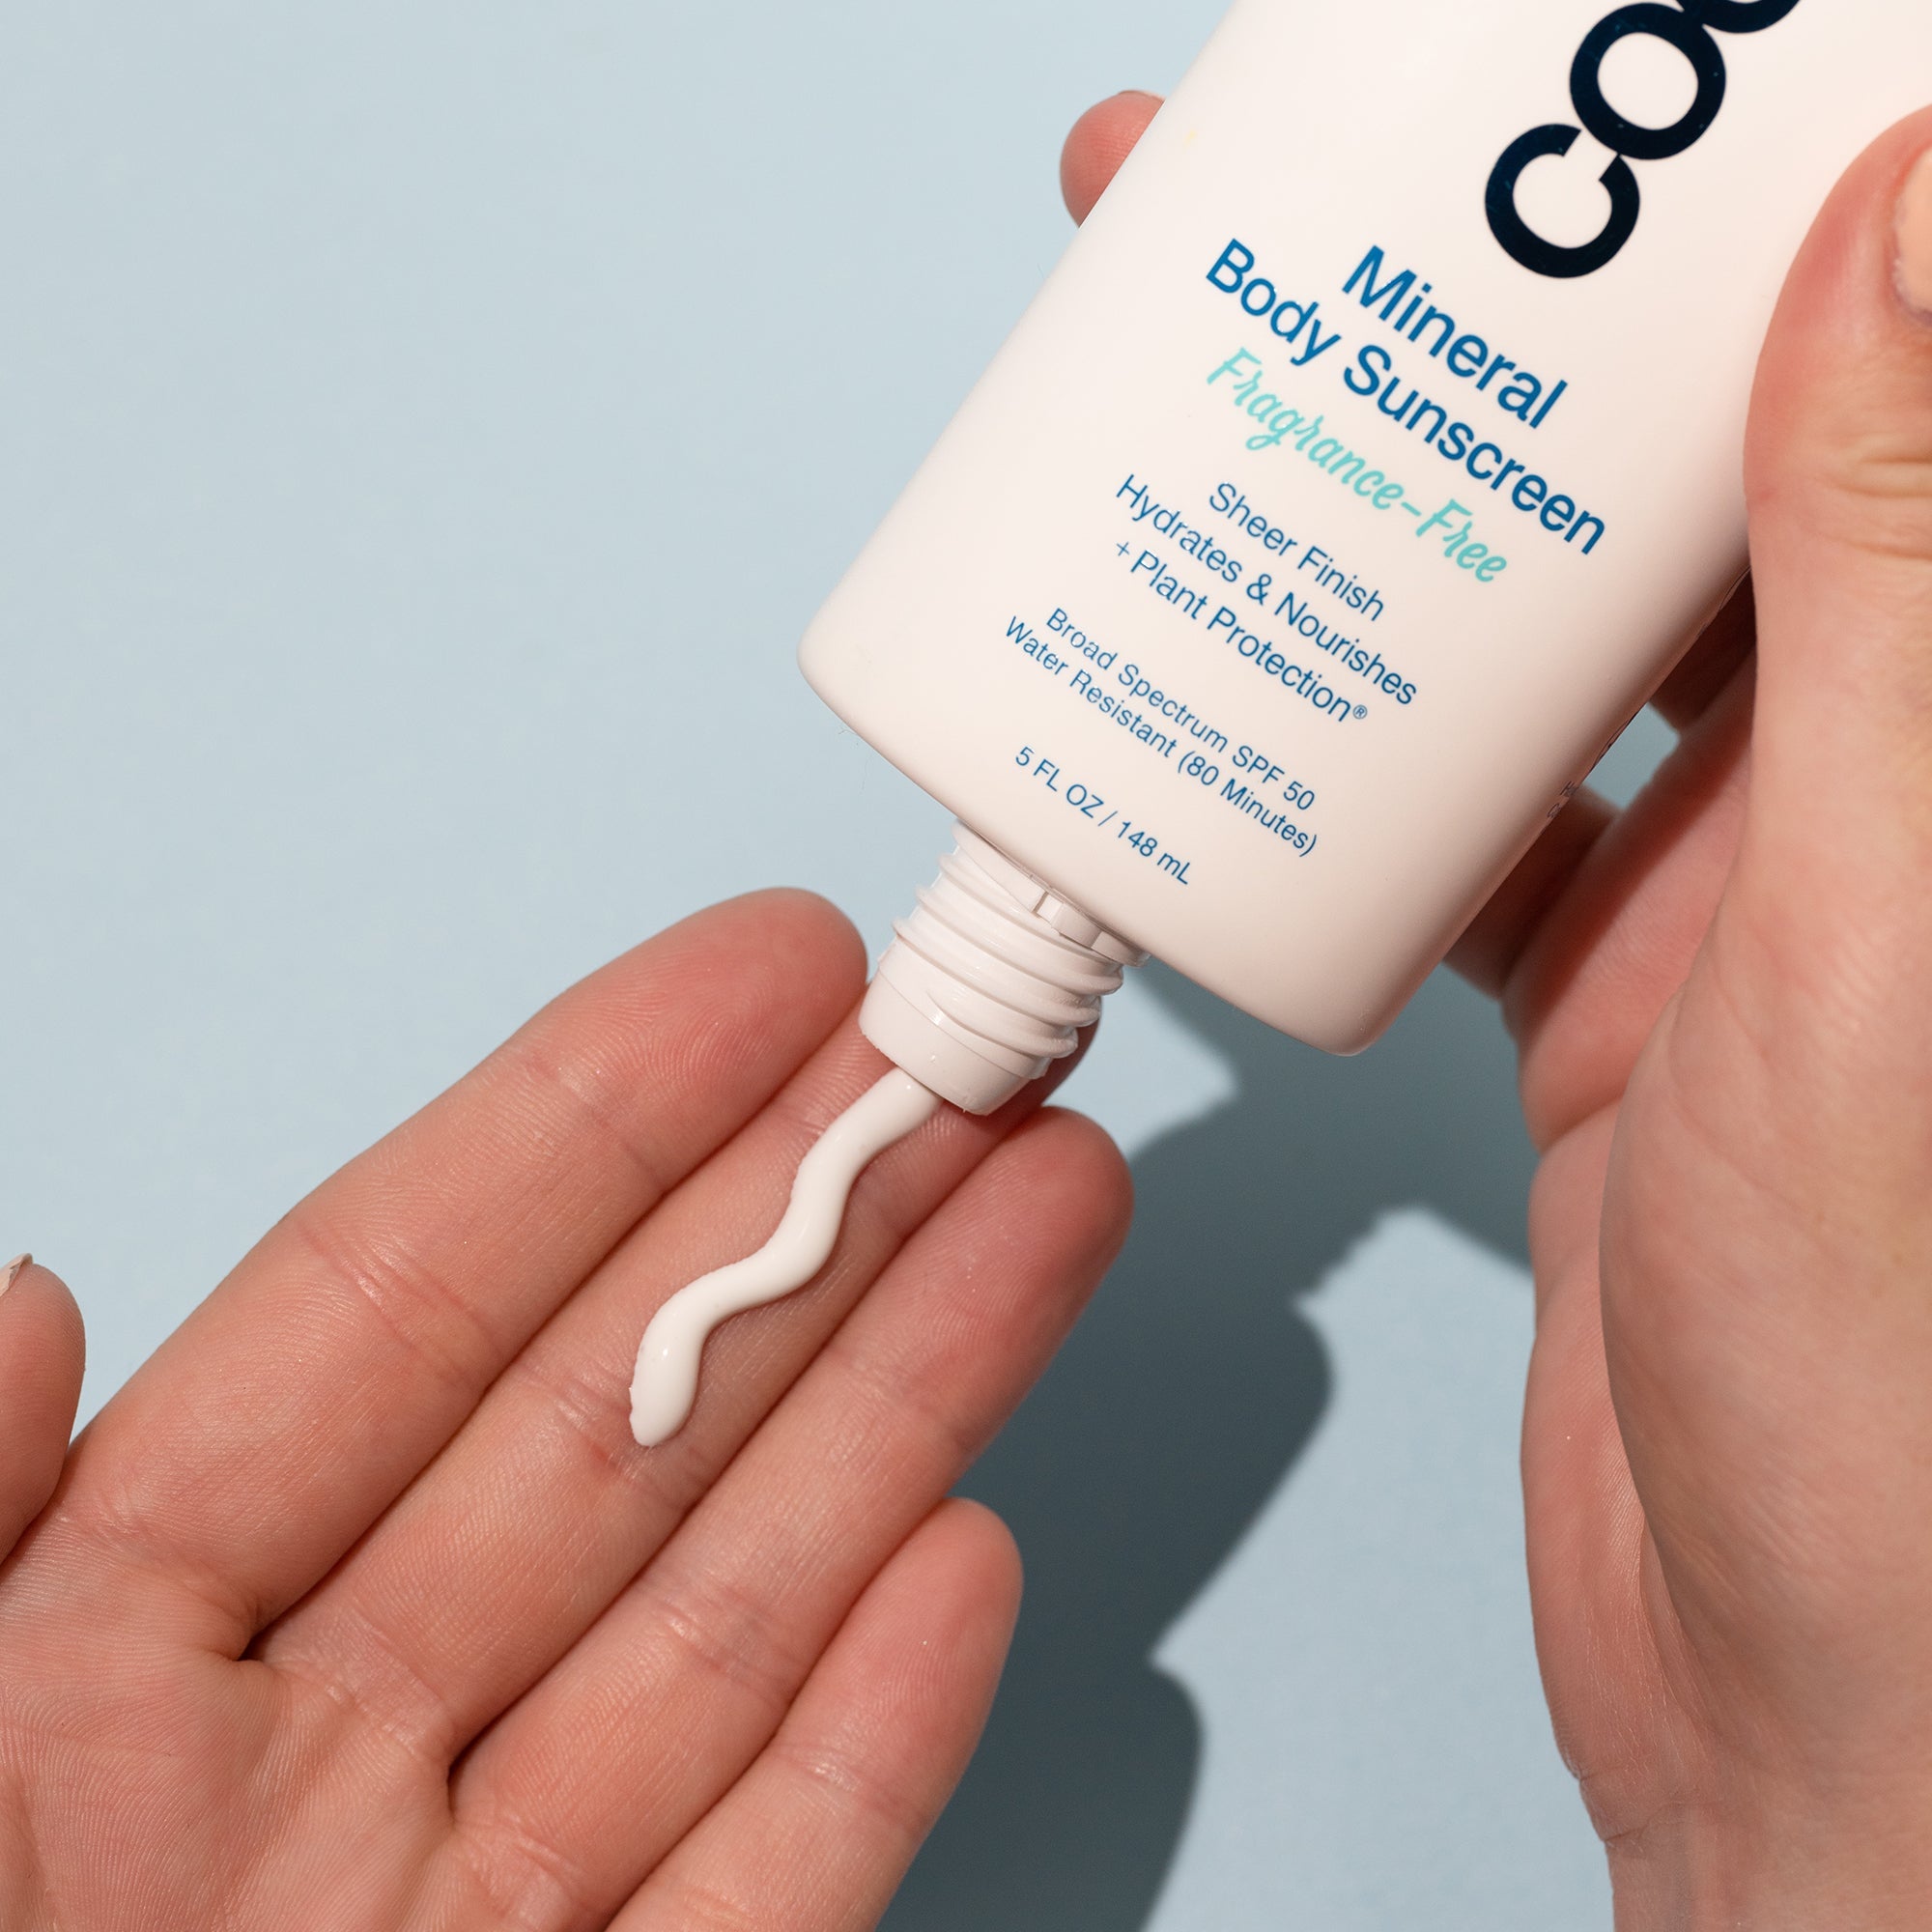 Mineral Body Organic Sunscreen Lotion SPF 50 - Fragrance Free | COOLA